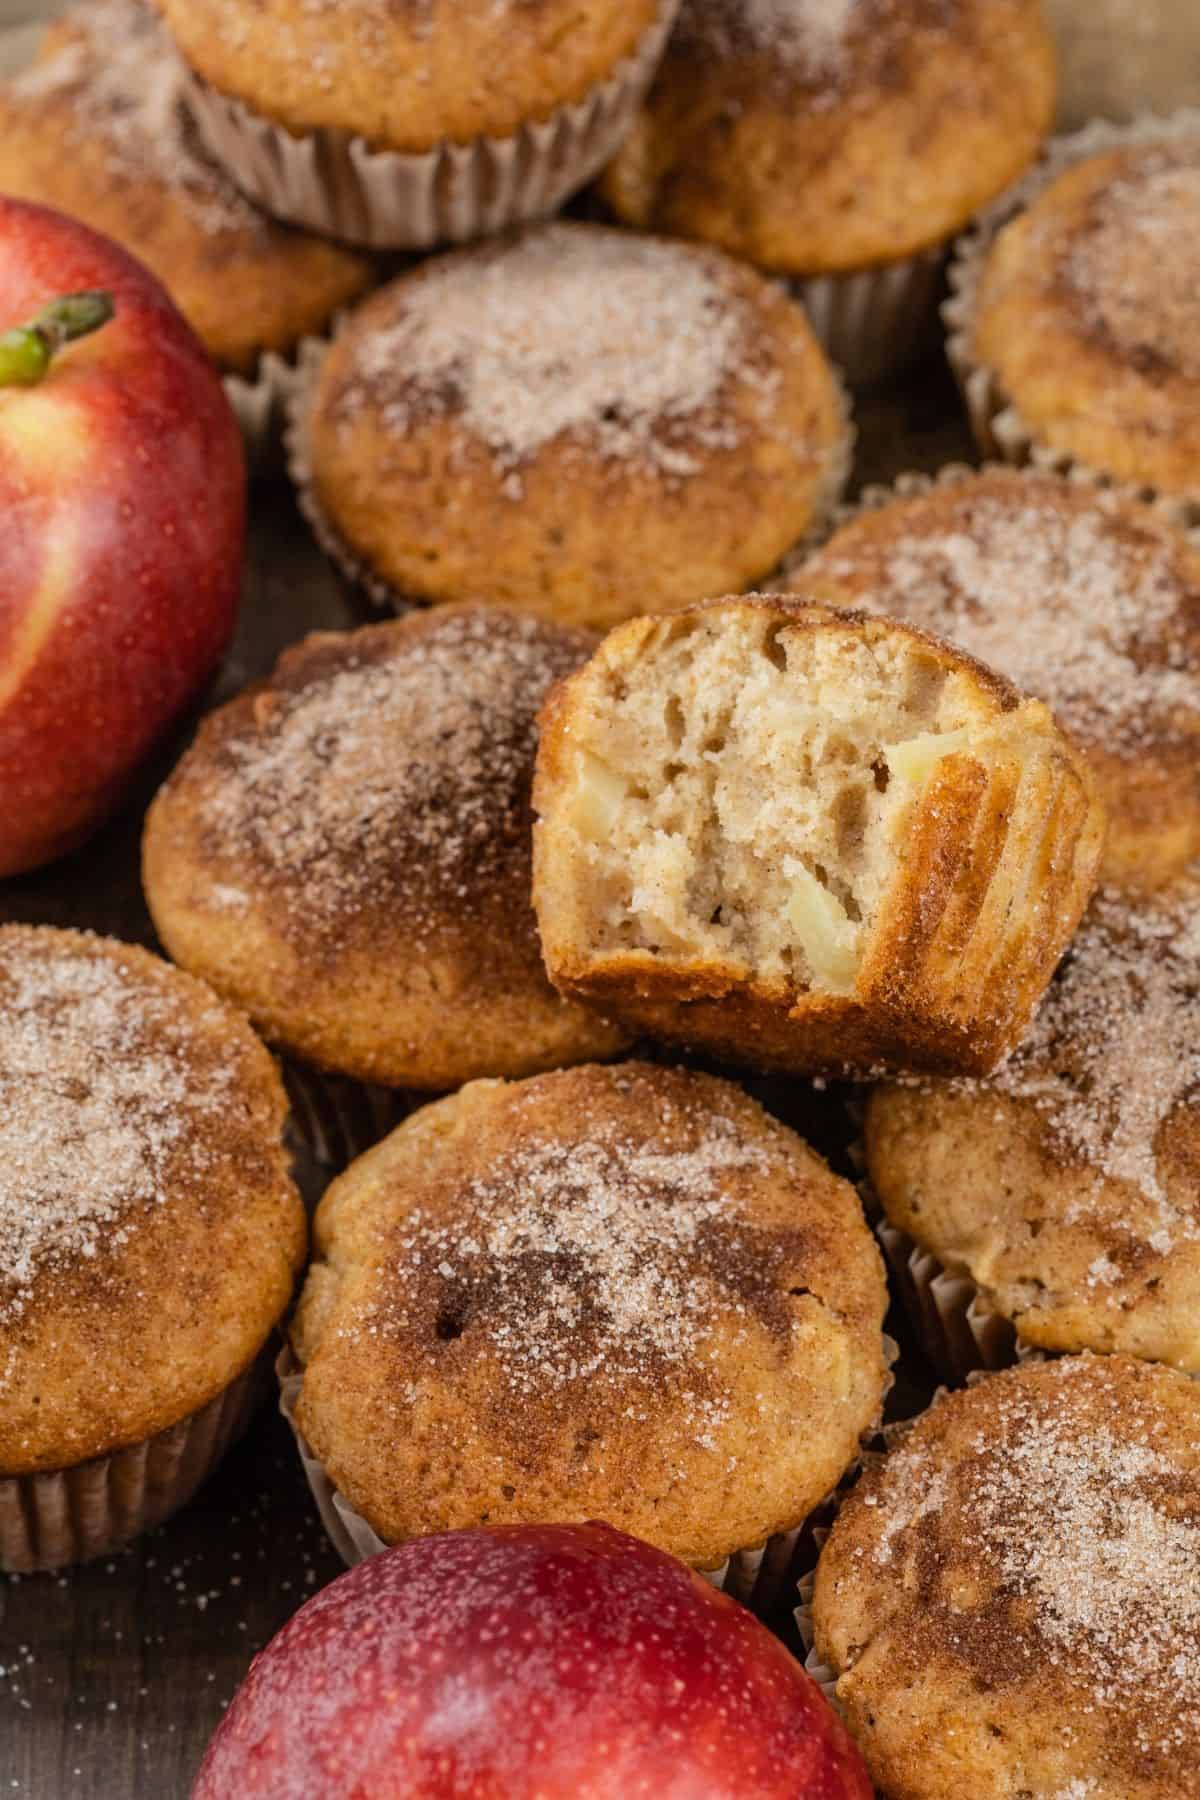 a pile of apple cinnamon muffins on the table with apples mixed in. one muffin is on top of the others and a bite is taken out of it.